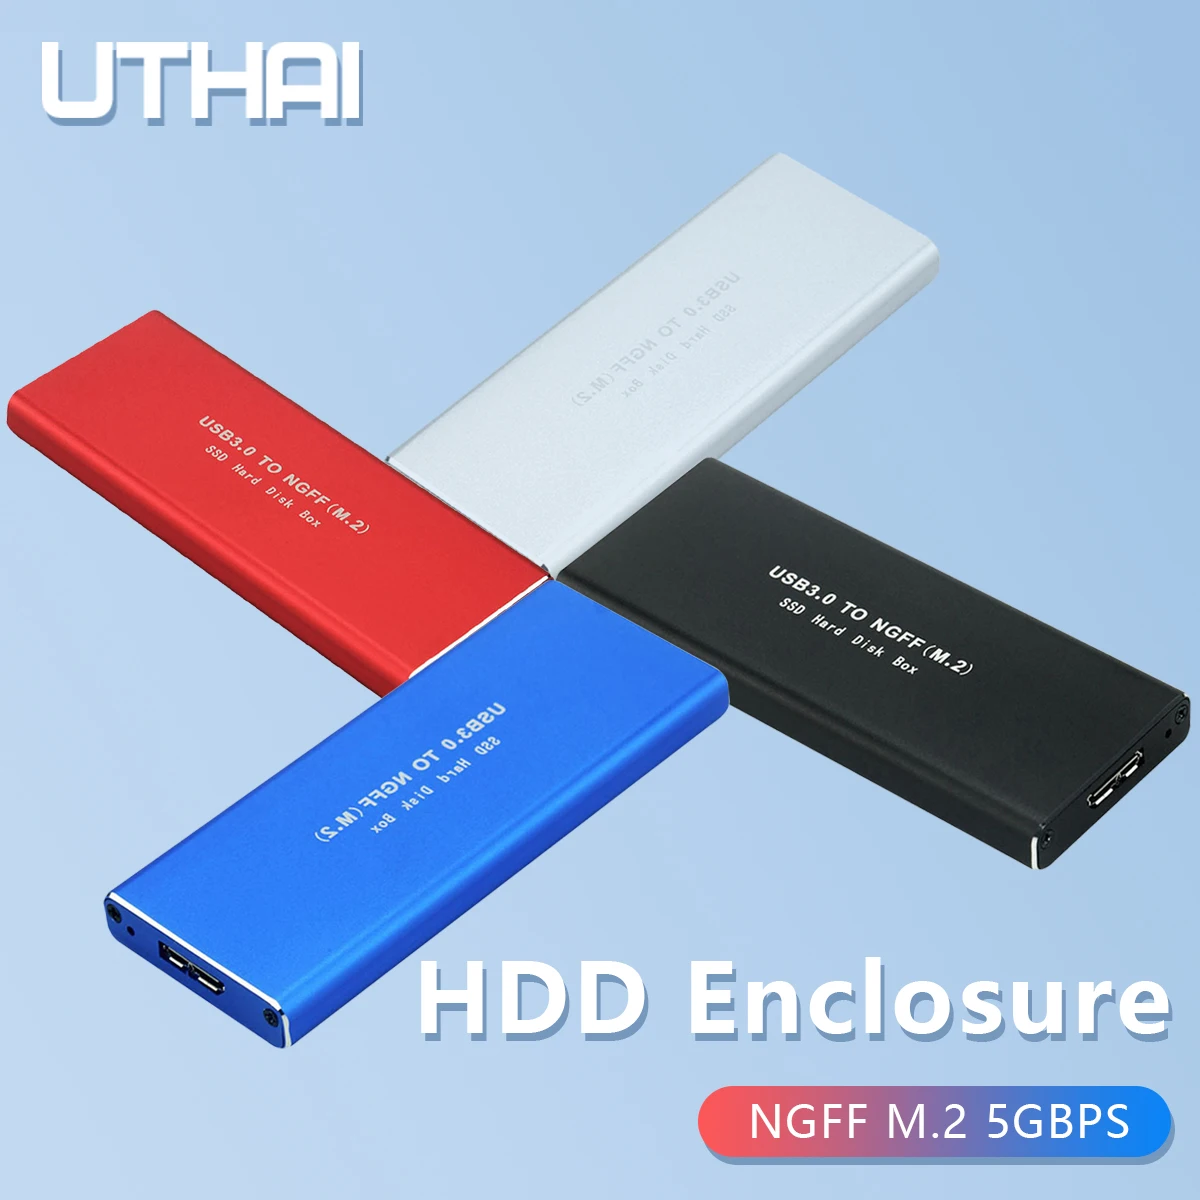 NGFF Hard Disk External M.2 Solid State 5GBPS SSD Cooling Metal Case USB3.0 PC for 2230/2242/2260/2280 Mobile  HDD Enclosure